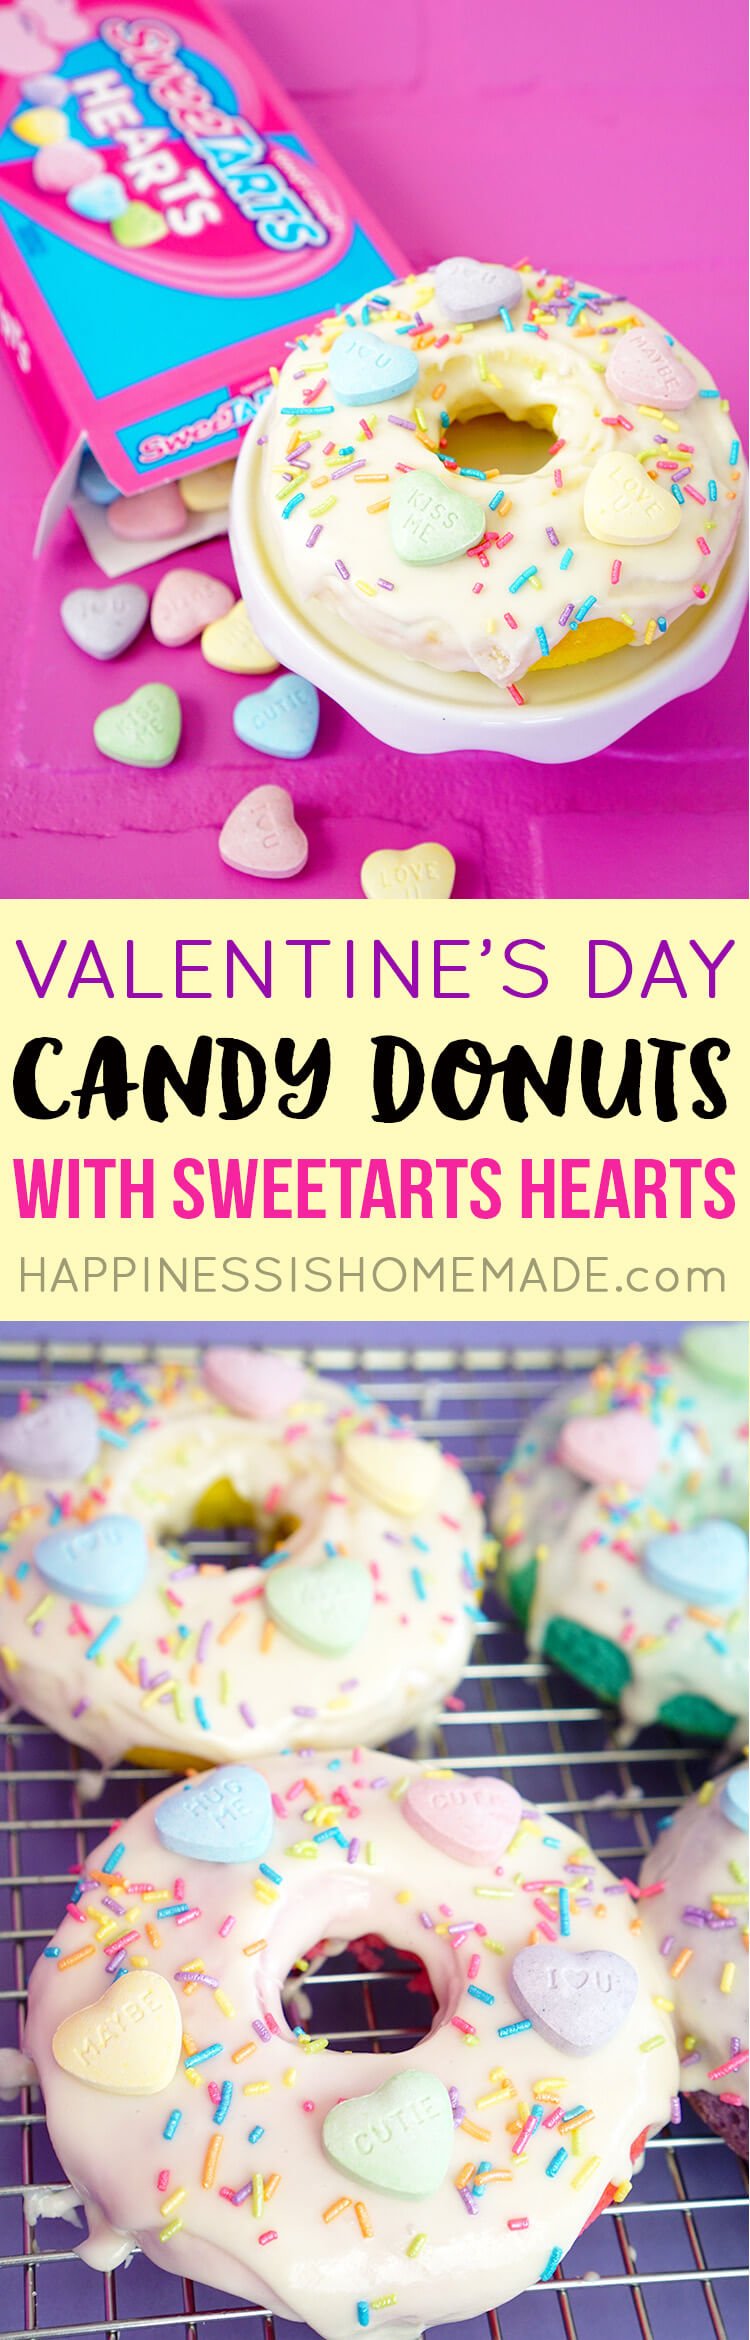 SweeTART Hearts Candy Valentine's Day Donuts Gift Idea